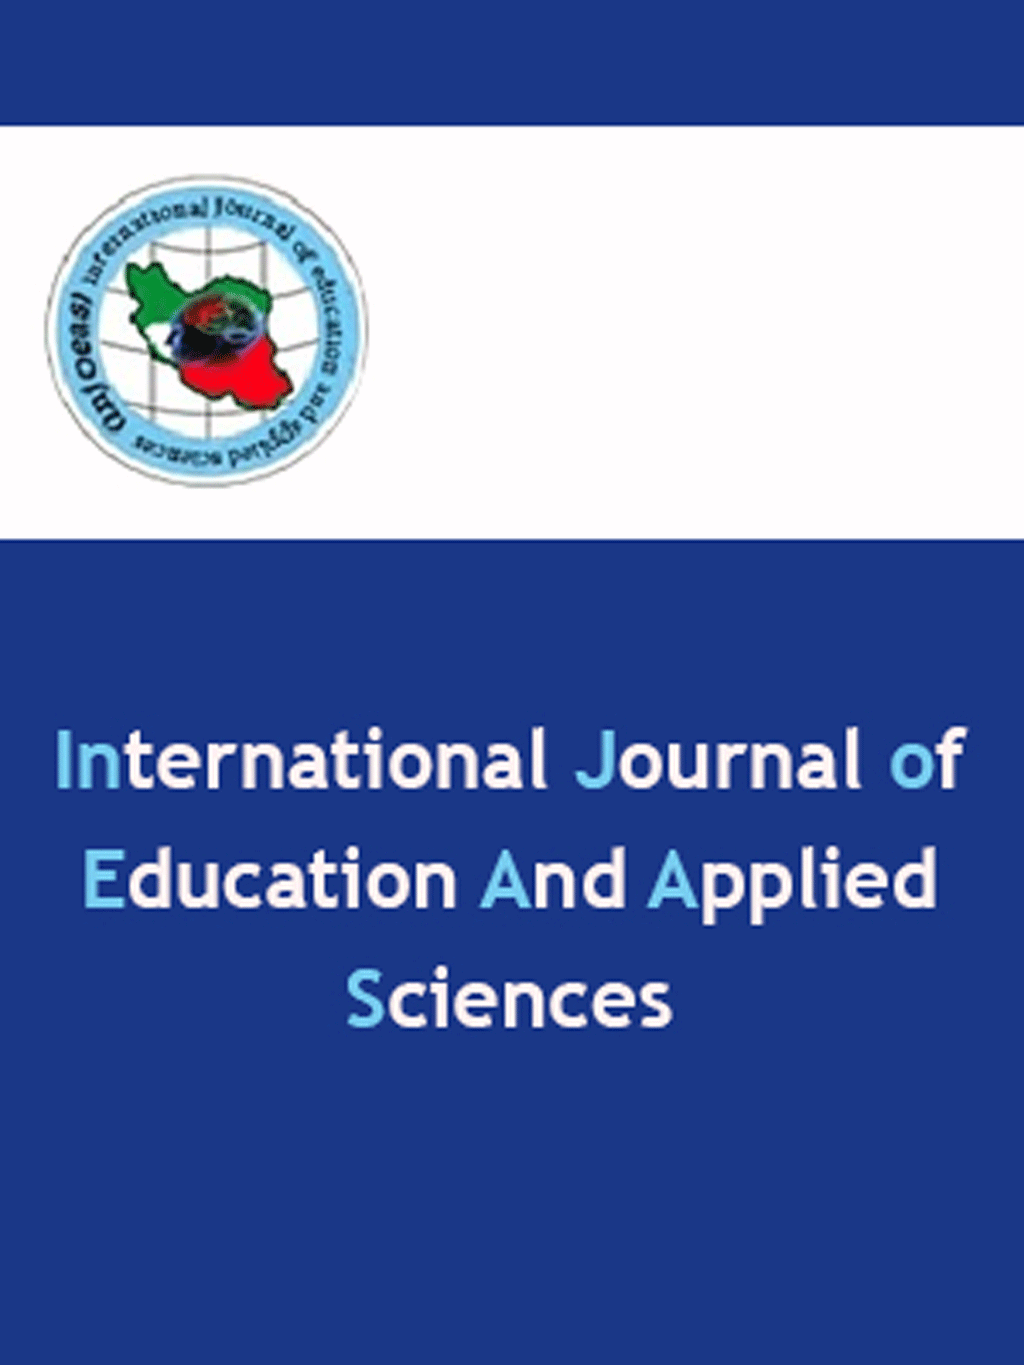 Education and Applied Sciences - July 2020, Volume 1 - Number 2